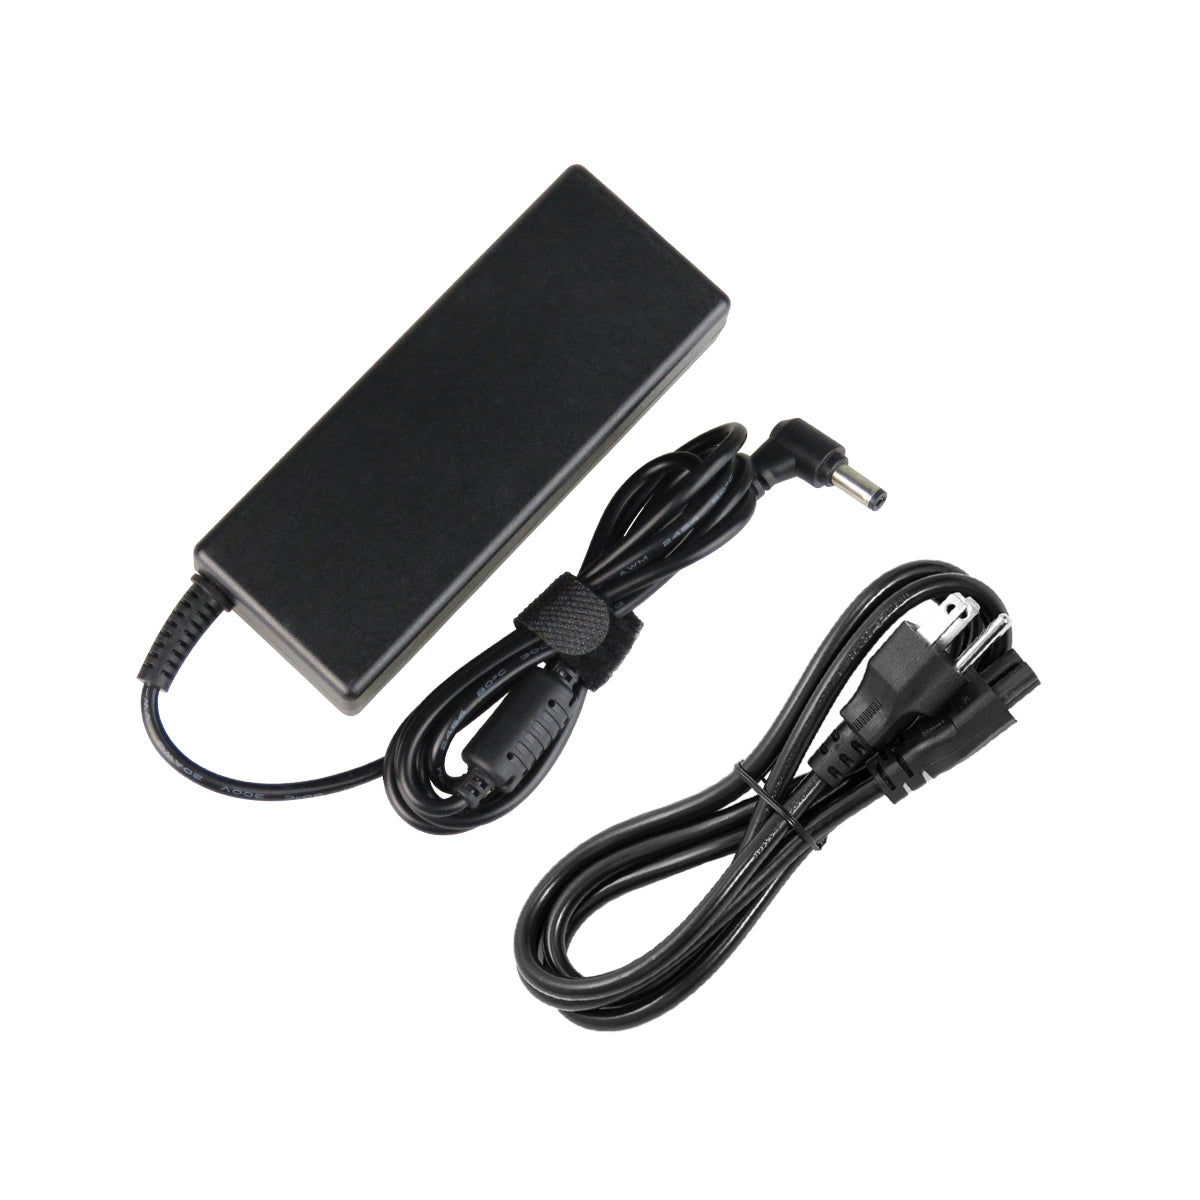 AC Adapter Charger for ASUS A8Dc Notebook.